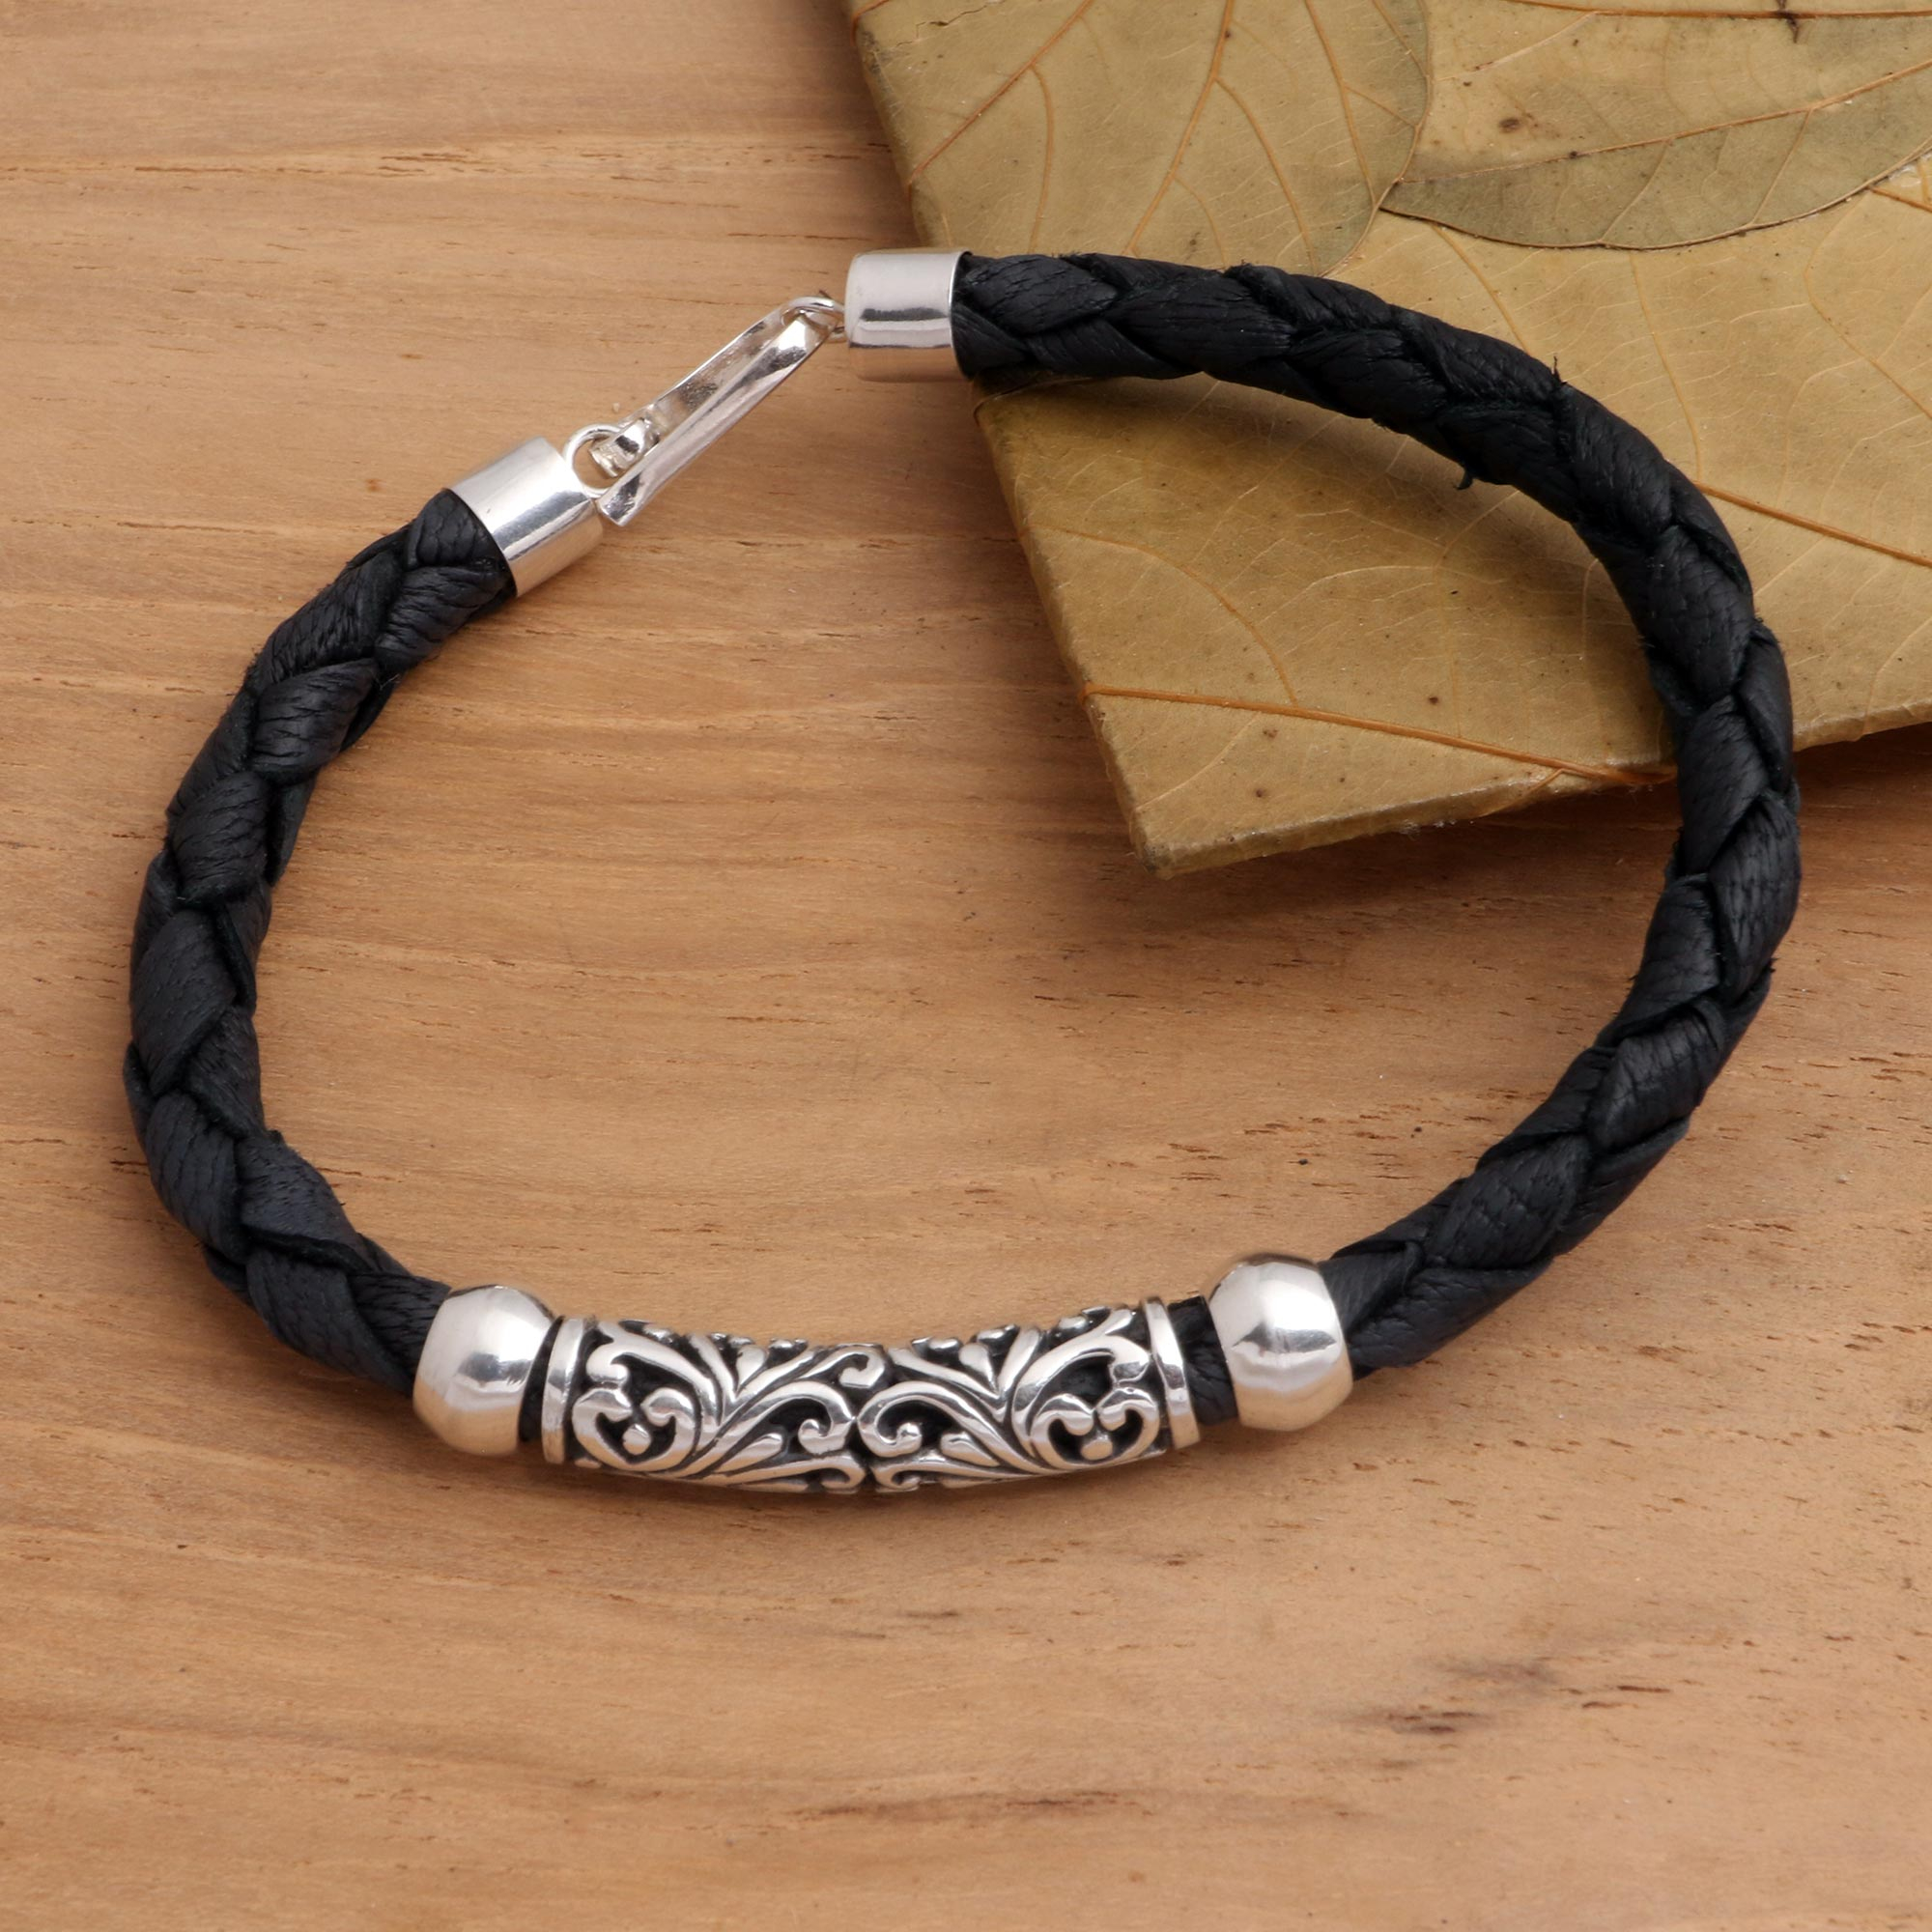 Balinese Style Sterling Silver and Leather Bracelet, 'Sanur Flourish'